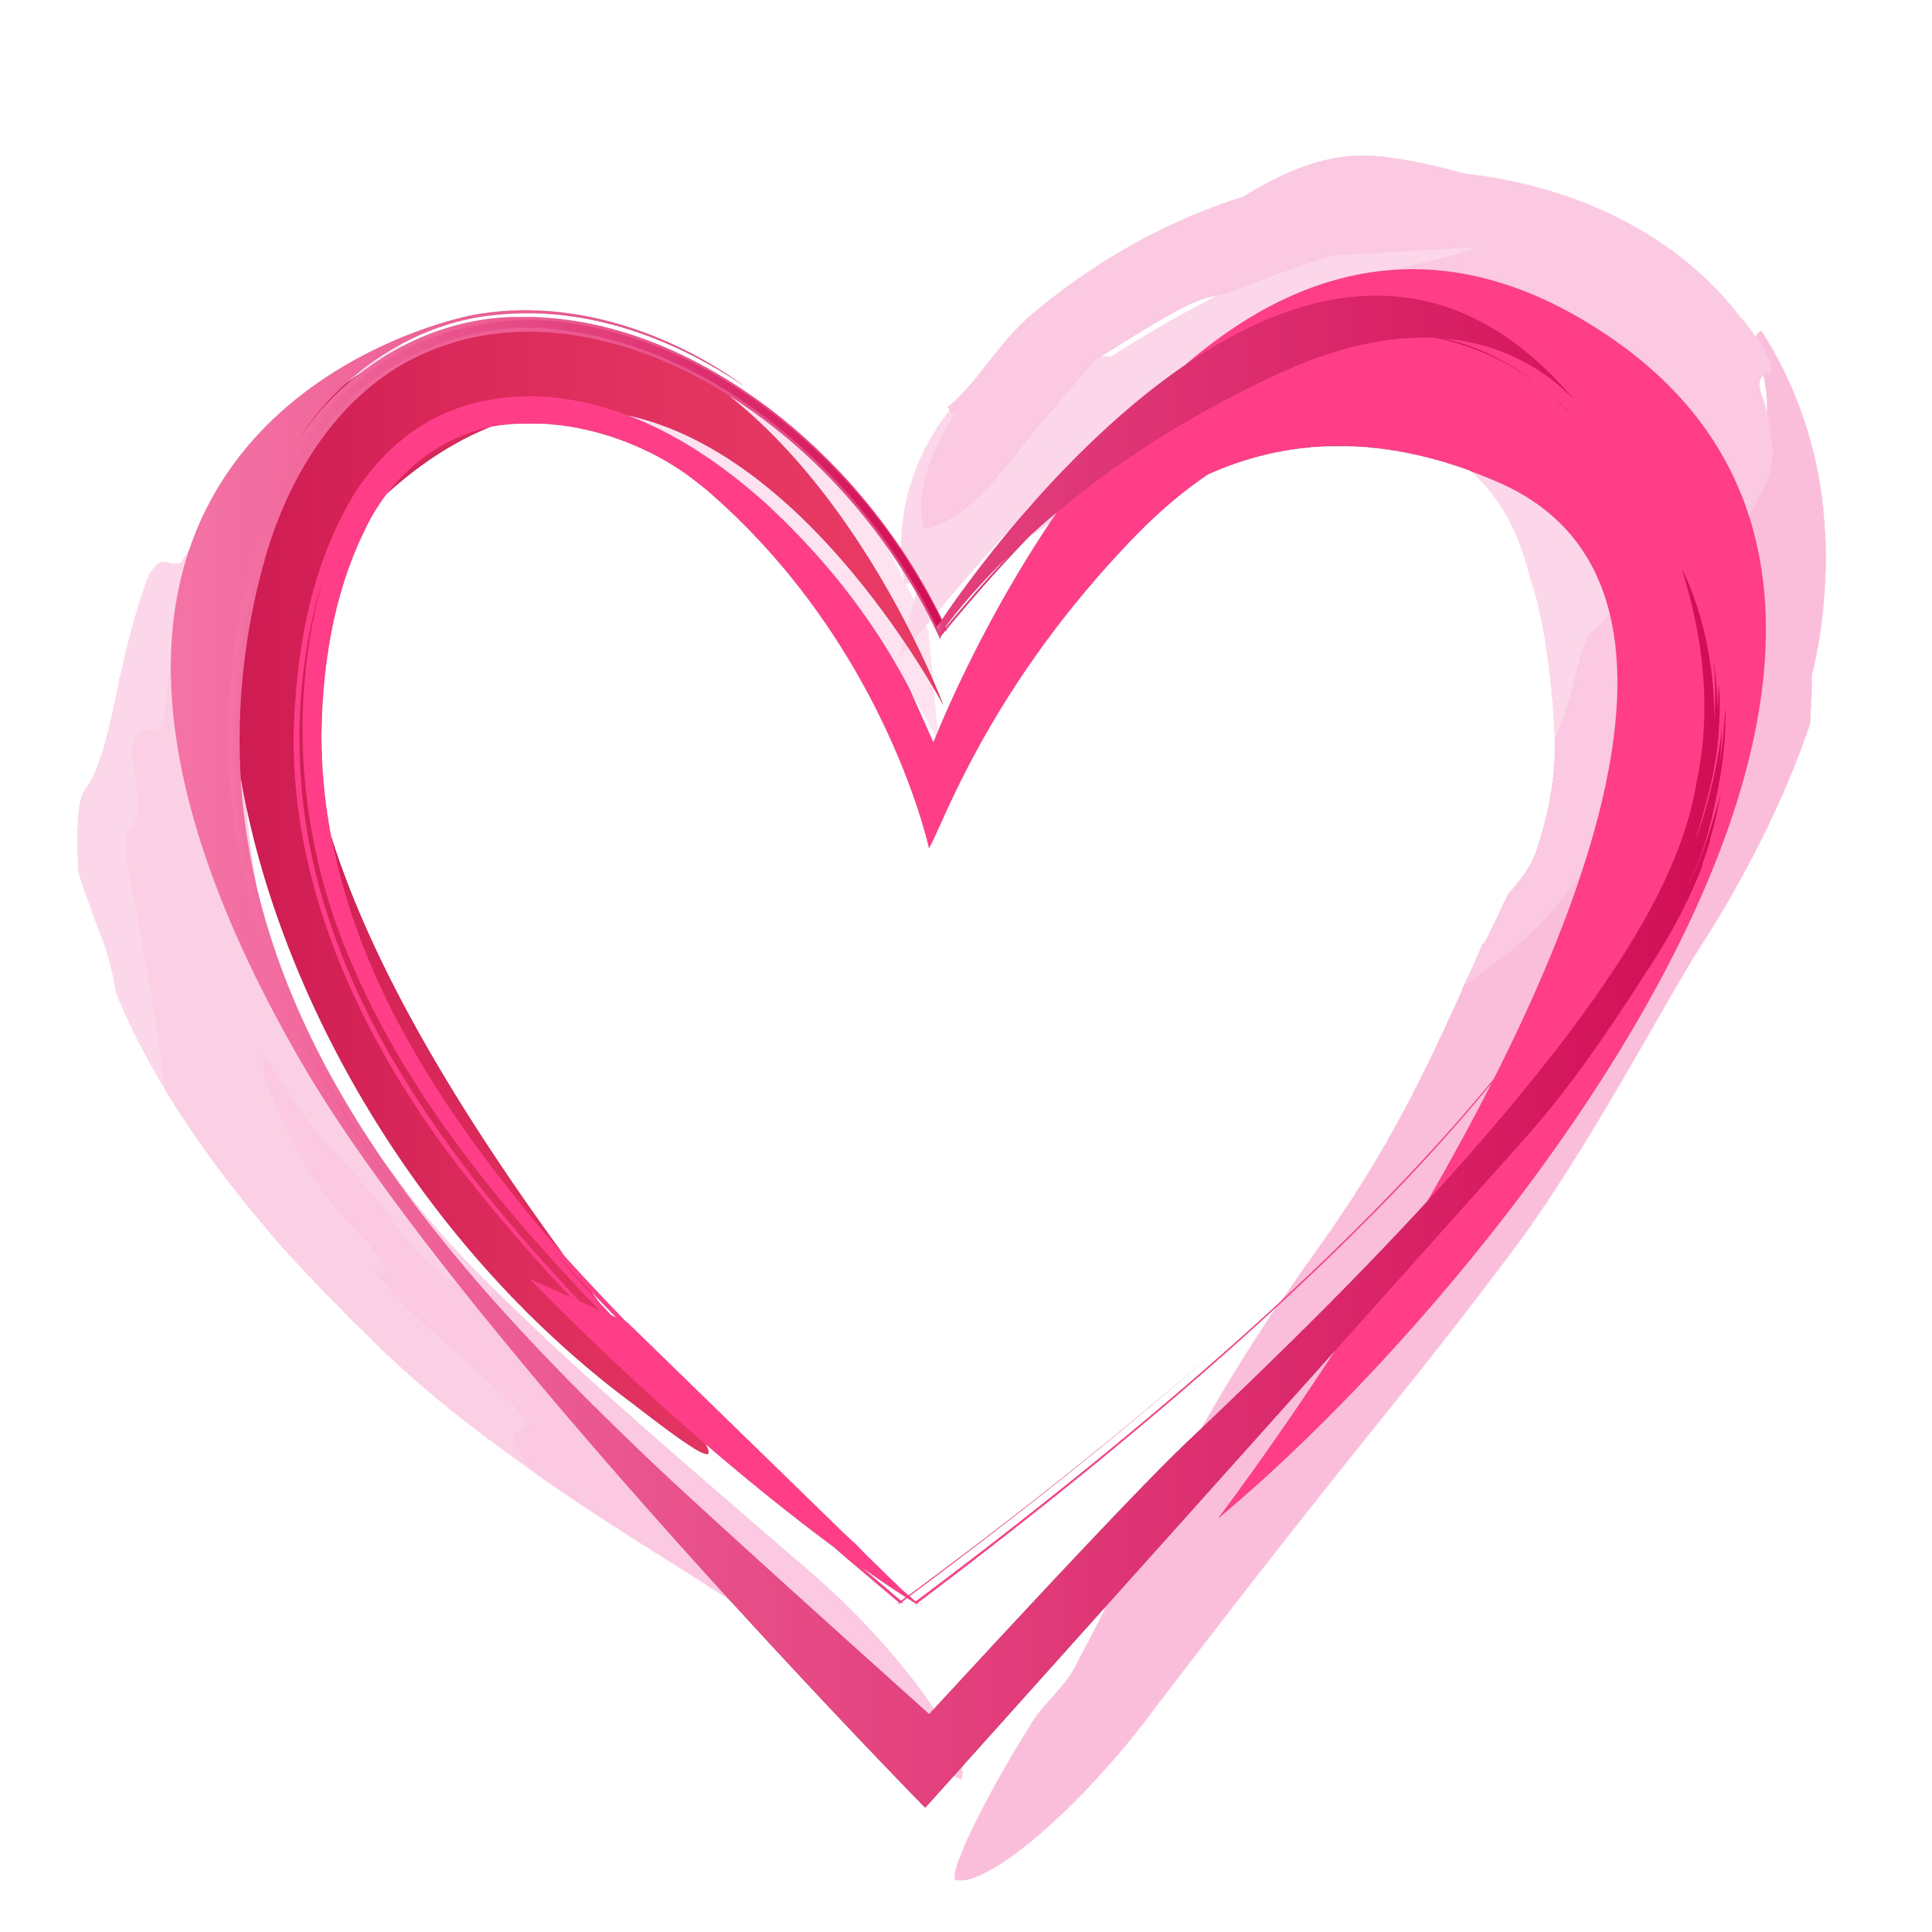 Pink Love Heart PNG HD - 122335